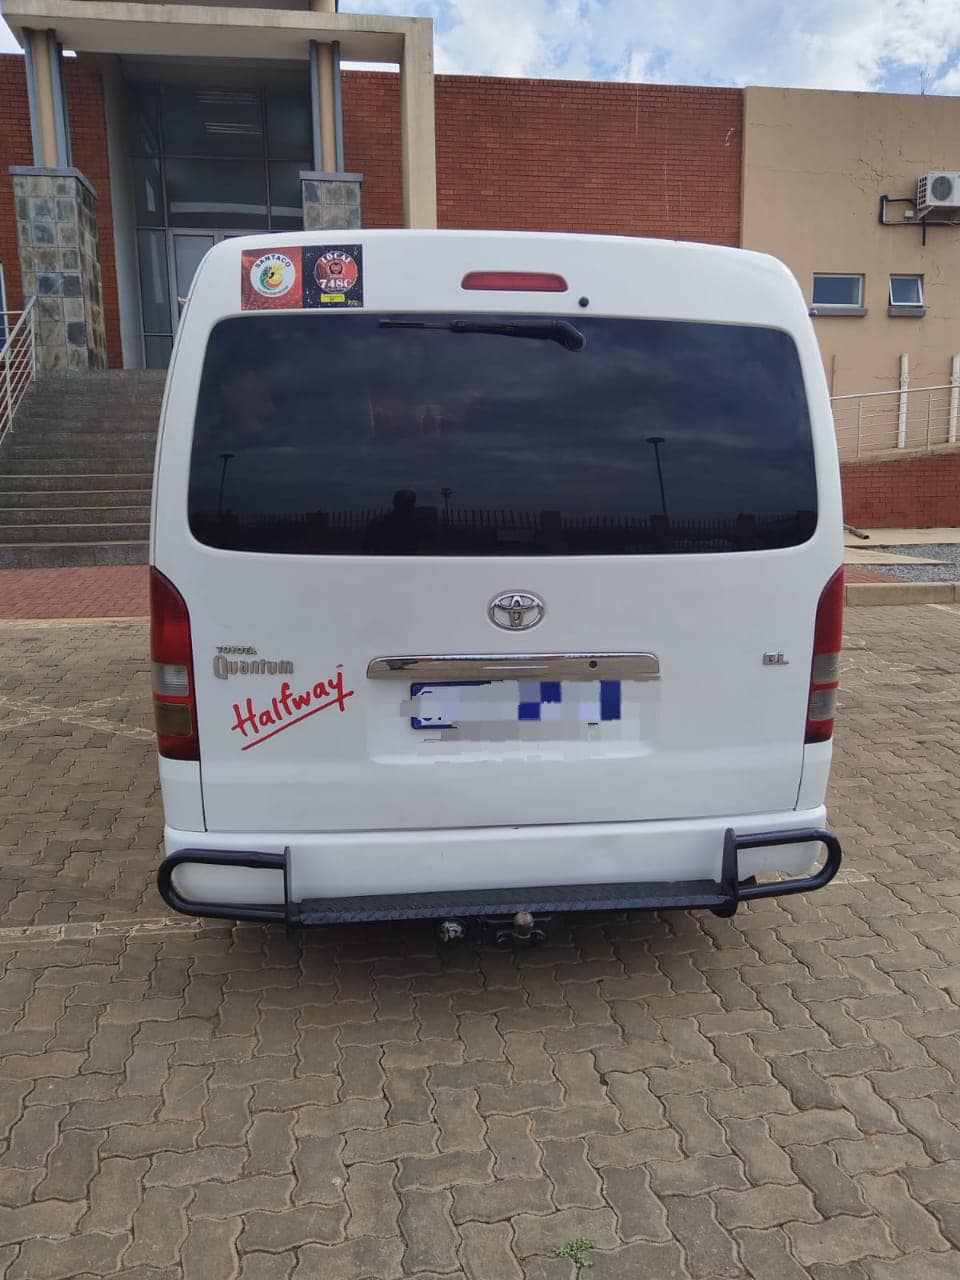 EMPD Officers arrested a reckless and negligent driver in Thembisa